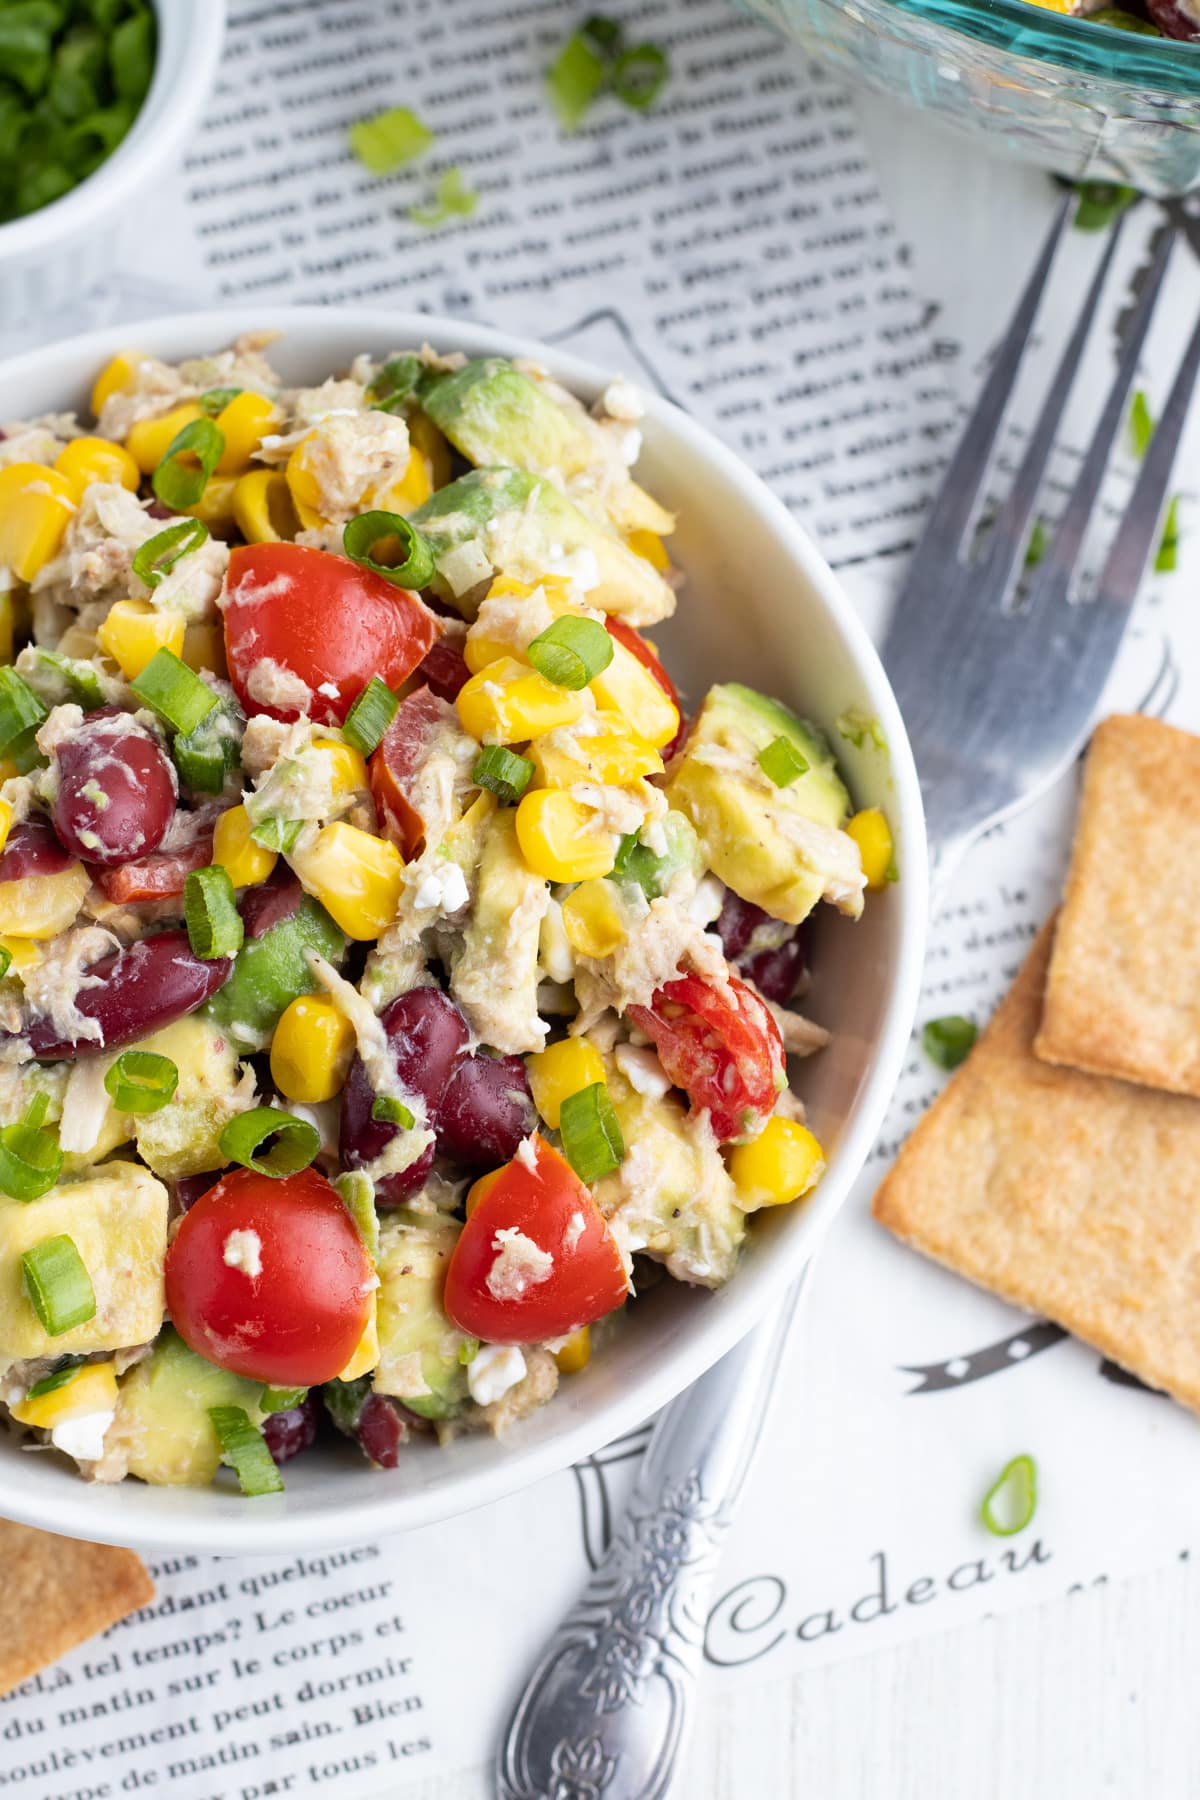 Picture of the tuna and bean salad with corn and avocado, tomatoes and green onions.